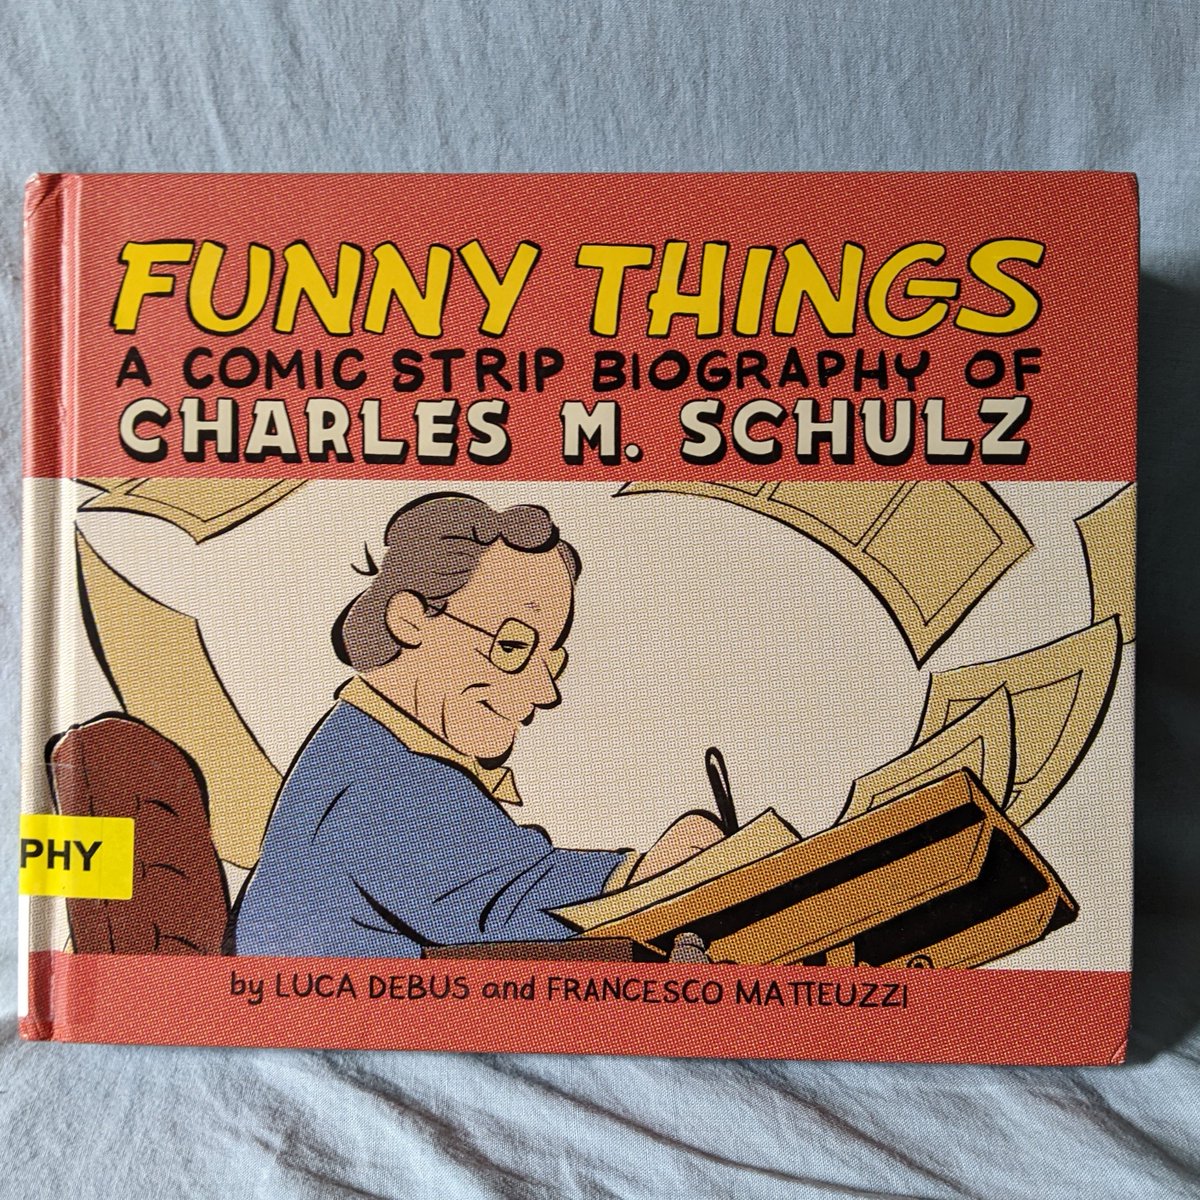 This caught my eye at the library and I had to pick it up. I didn't know much about Charles Schulz, but I suspected I'd love it - and I did! Bravo to Luca Debus & Francesco Matteuzzi for creating this funny, touching tribute, 'Funny Things.' (Thnx @topshelfcomix for being you!)